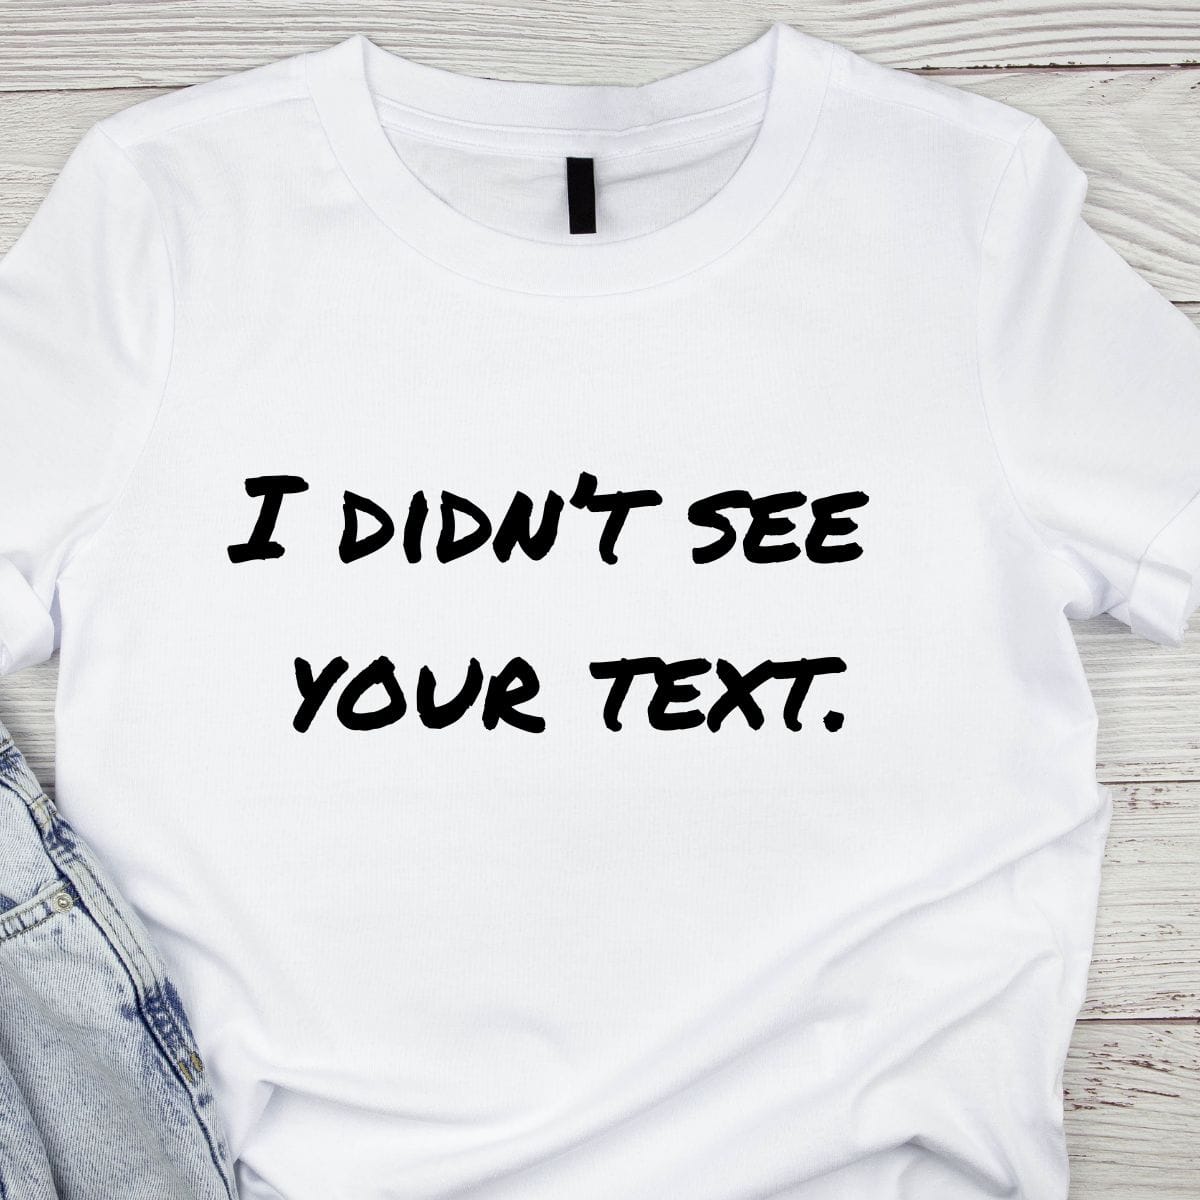 i didnt see your text white lies tshirt